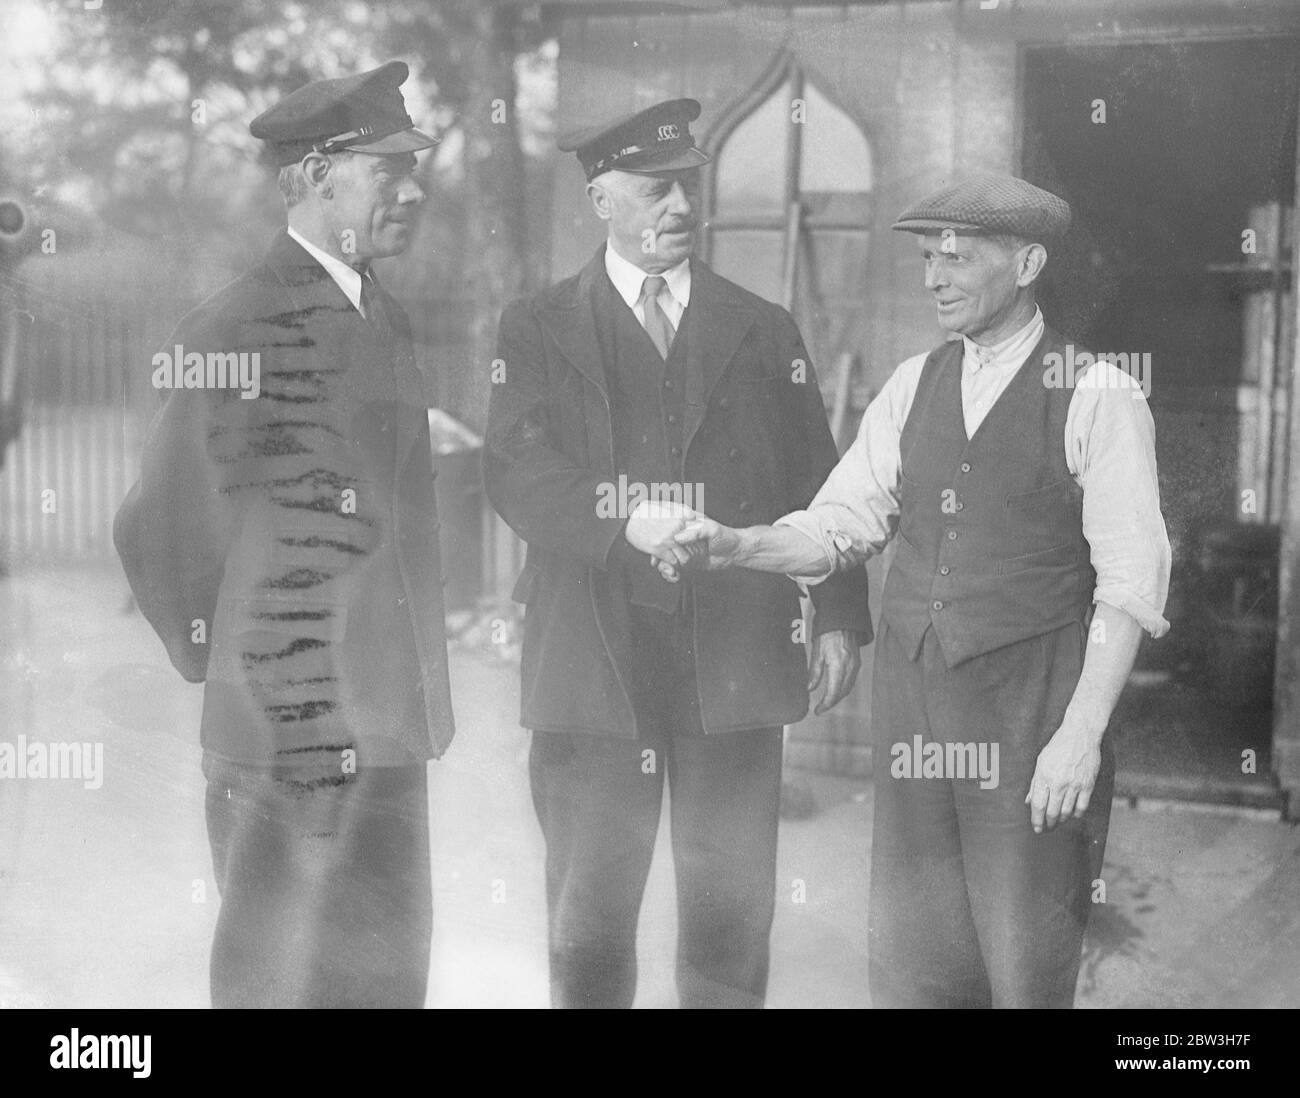 London boatman retiring after 46 years . Mr Charlie Potter being congratulated by fellow workmen on his retirement . 26 October 1935 Stock Photo